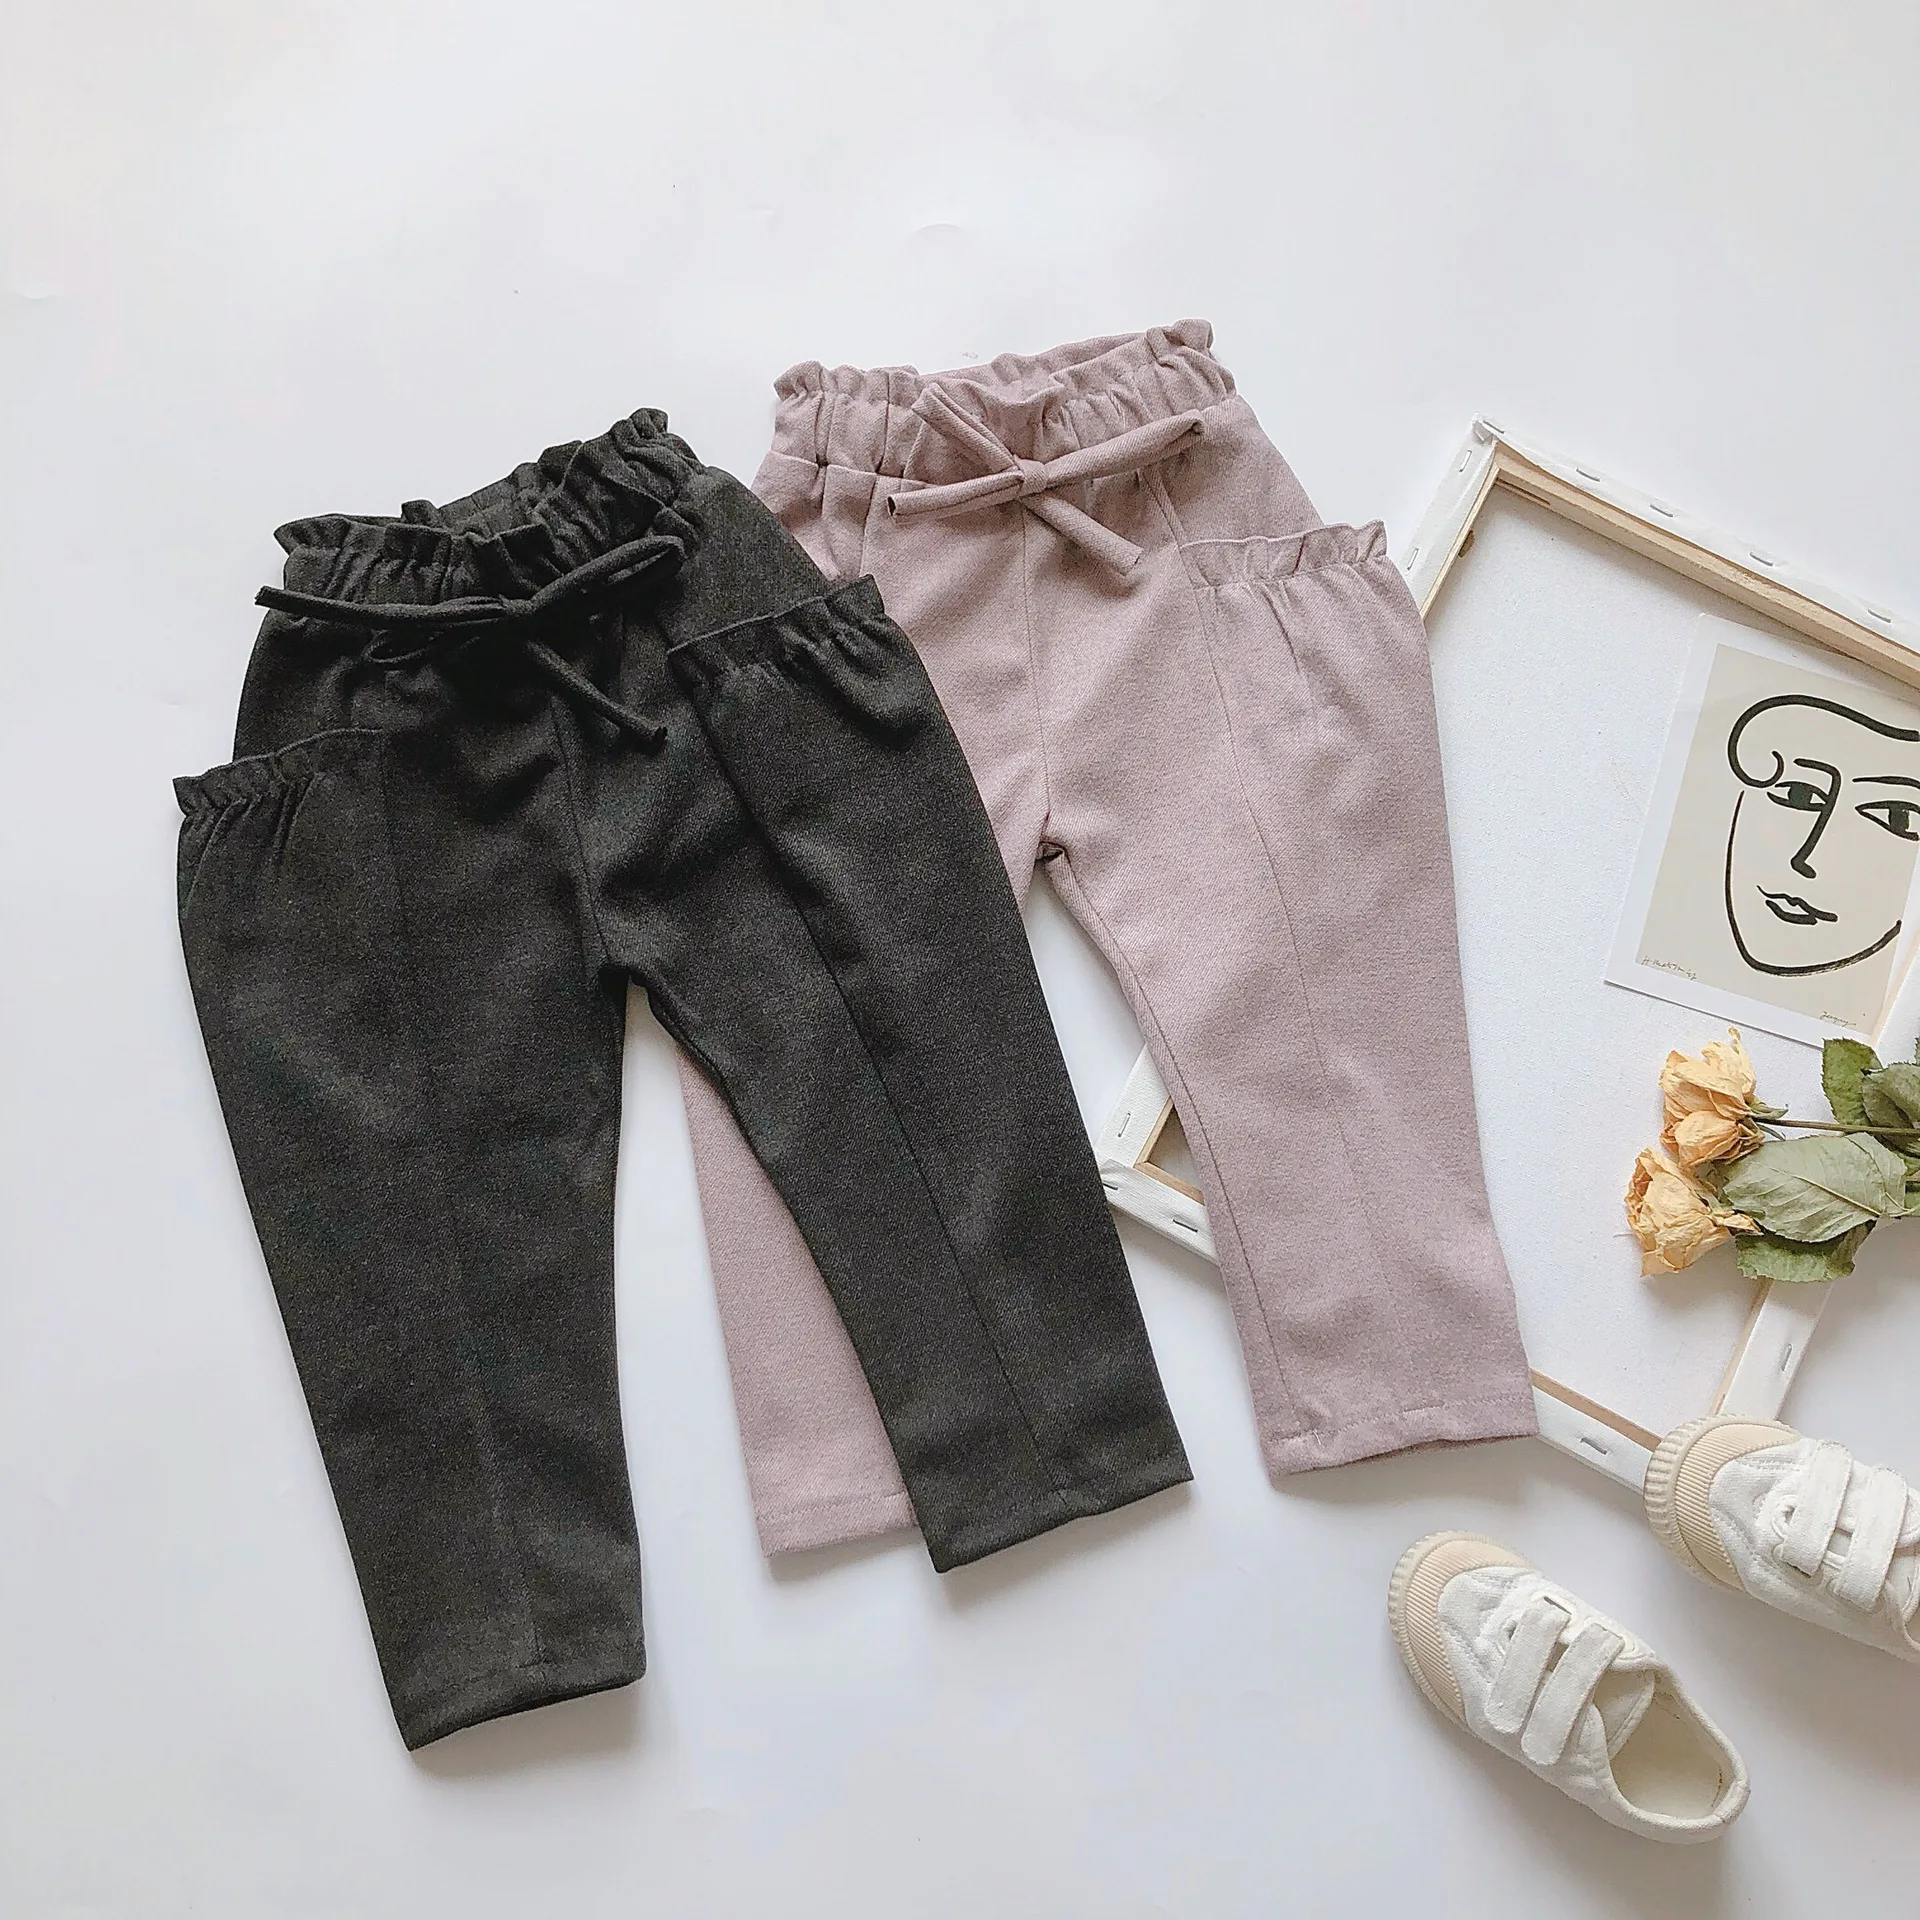 2019 Autumn and Winter New Arrival Korean style casual pure color long pants with pockets for fashion sweet baby girls | Мать и ребенок